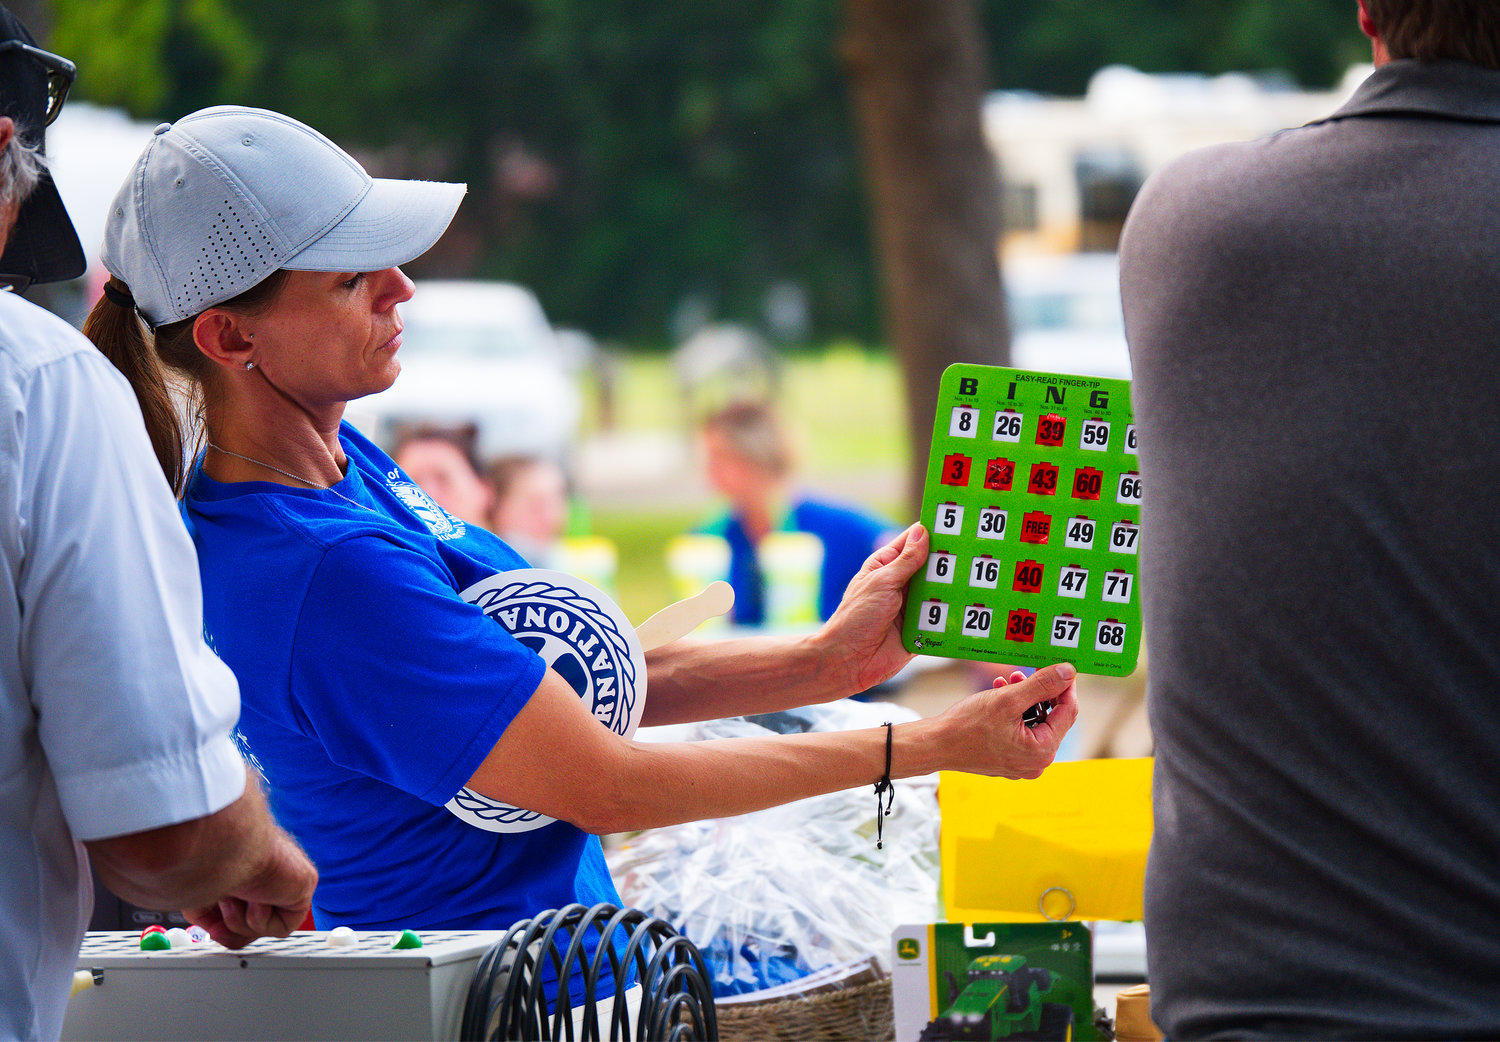 The winning numbers are checked on a bingo card at the popular Quitman-Lake Fork game during the Wood County Old Settlers Reunion, held Thursday through Saturday at Jim Hogg City Park in Quitman.